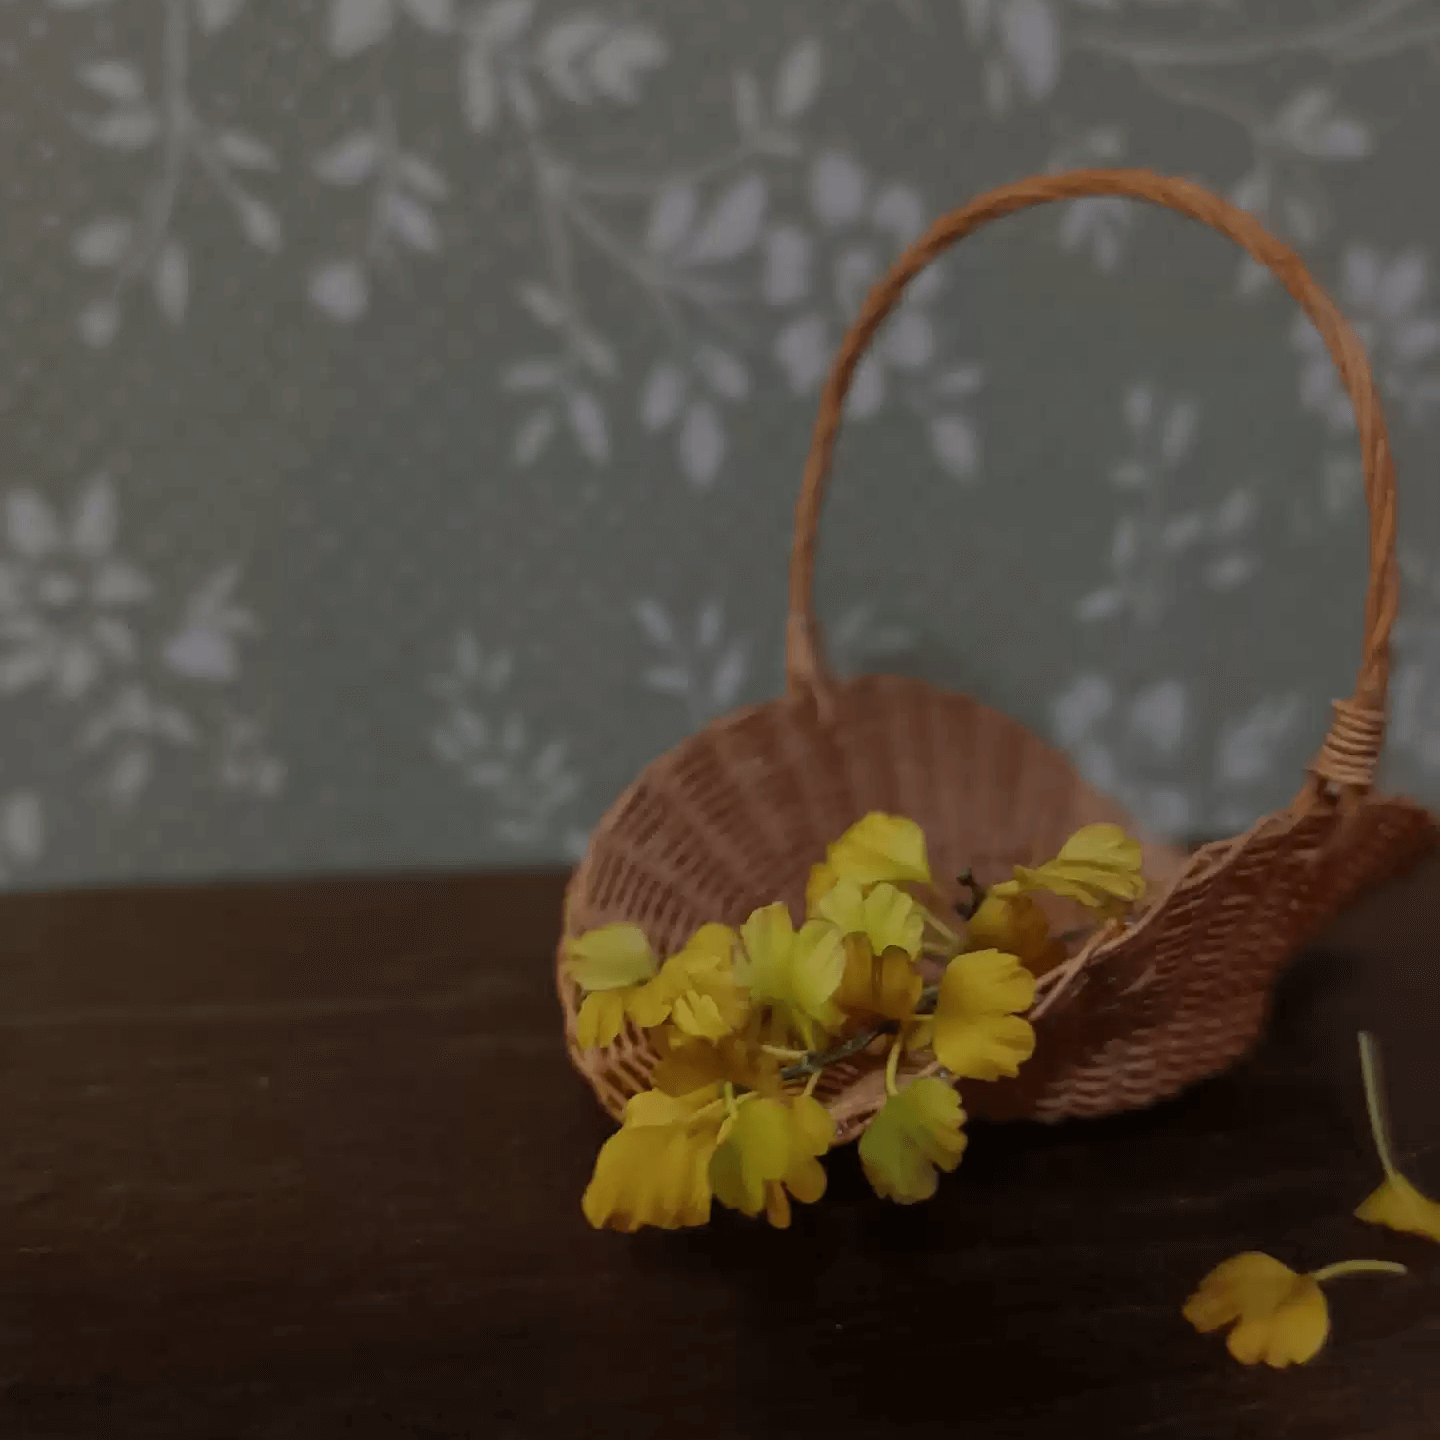 Ginkgo biloba, commonly known as ginkgo or gingko also known as the maidenhair tree, is a species of gymnosperm tree native to East Asia.  Scale: 1:6; 1:12  Material: Handmade from Clay